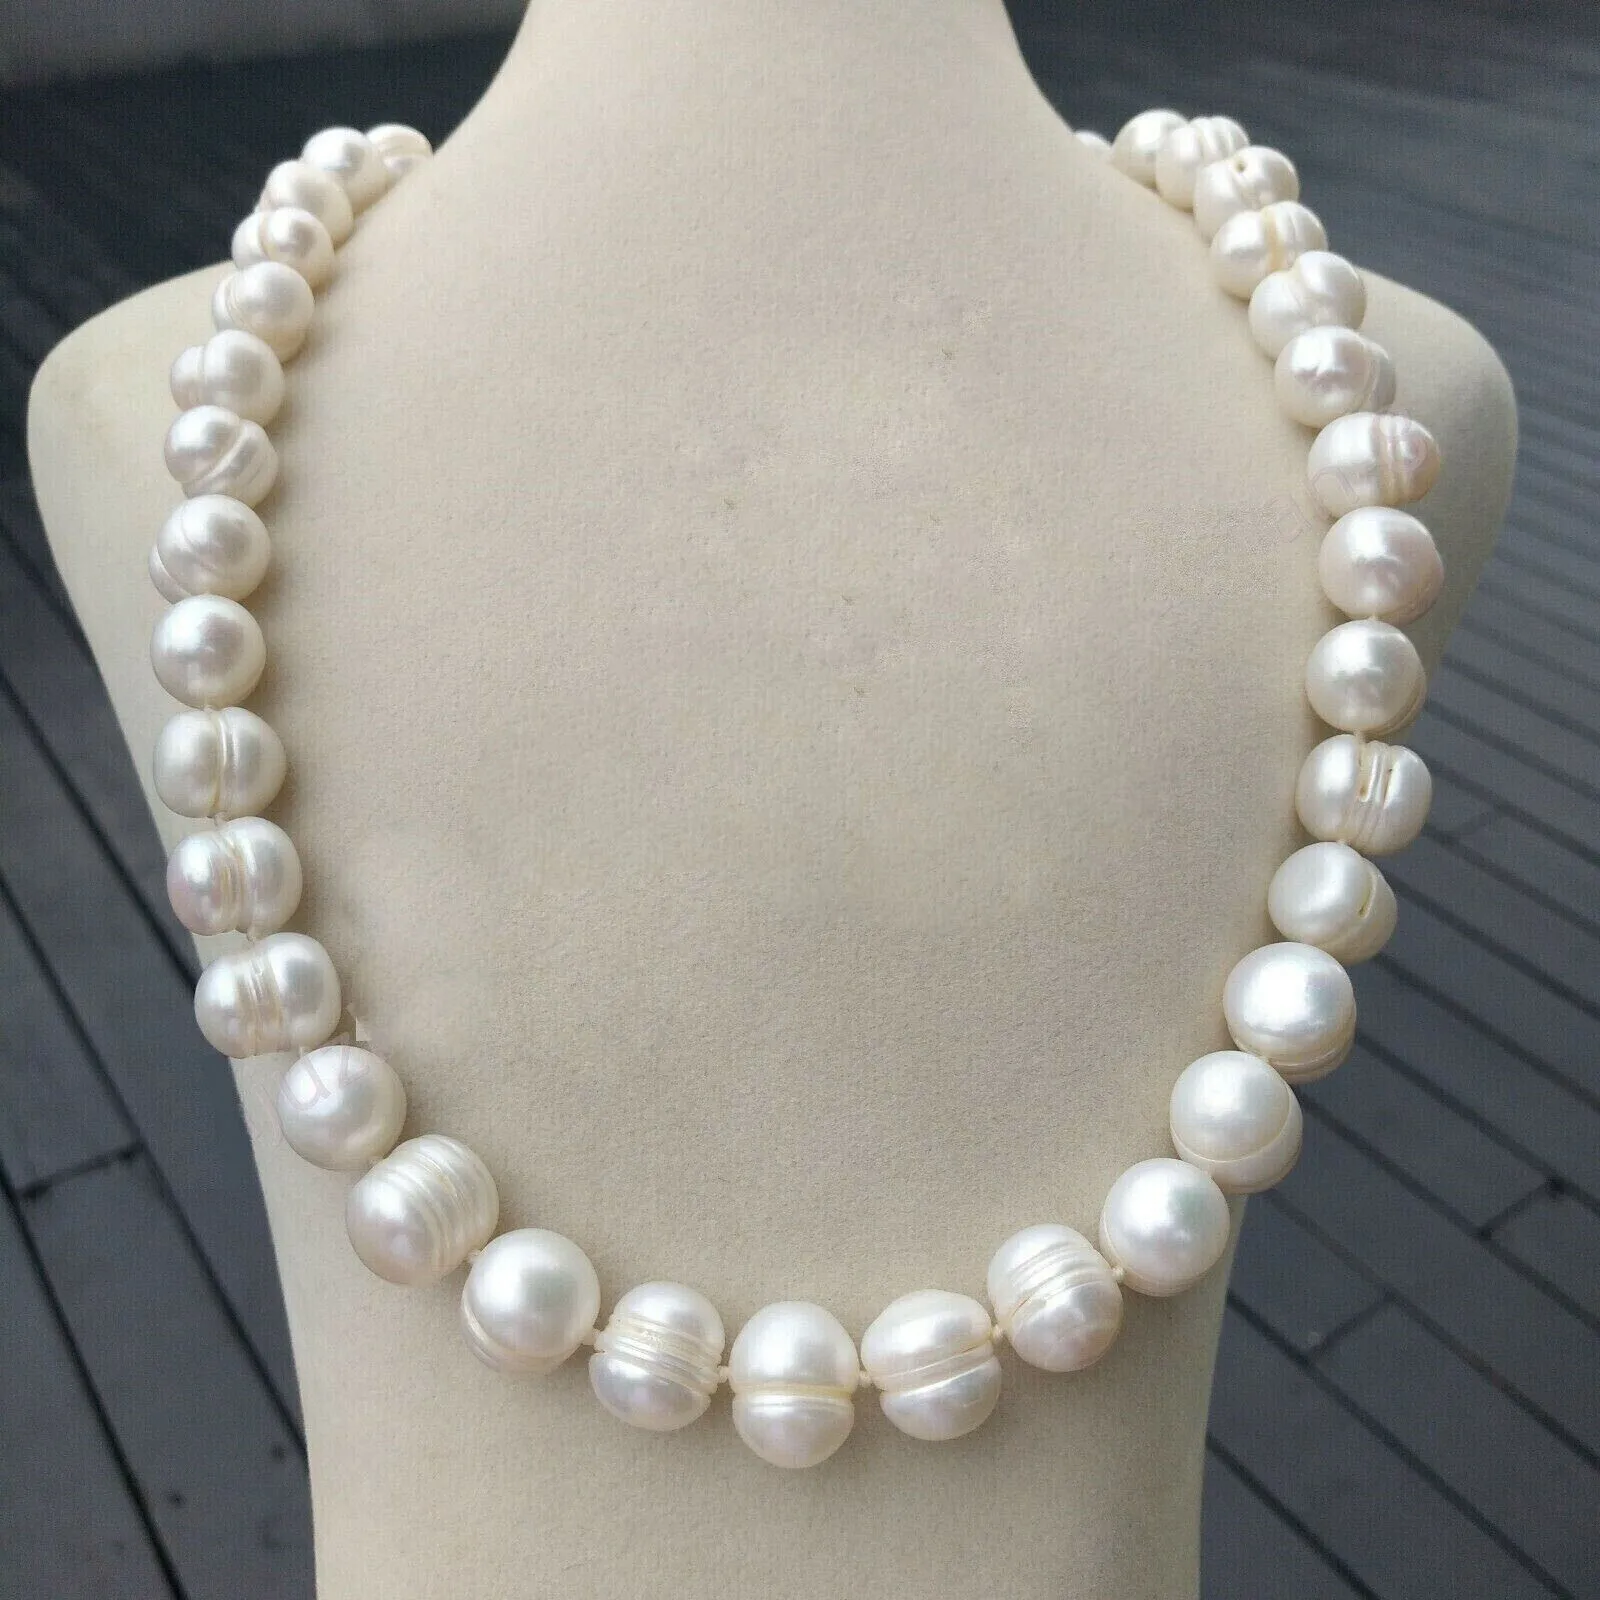 

18 inch 20in 24in 36in 52in AAA 11-10mm South China Sea natural white pearl necklace with 14Kp gold buckle and